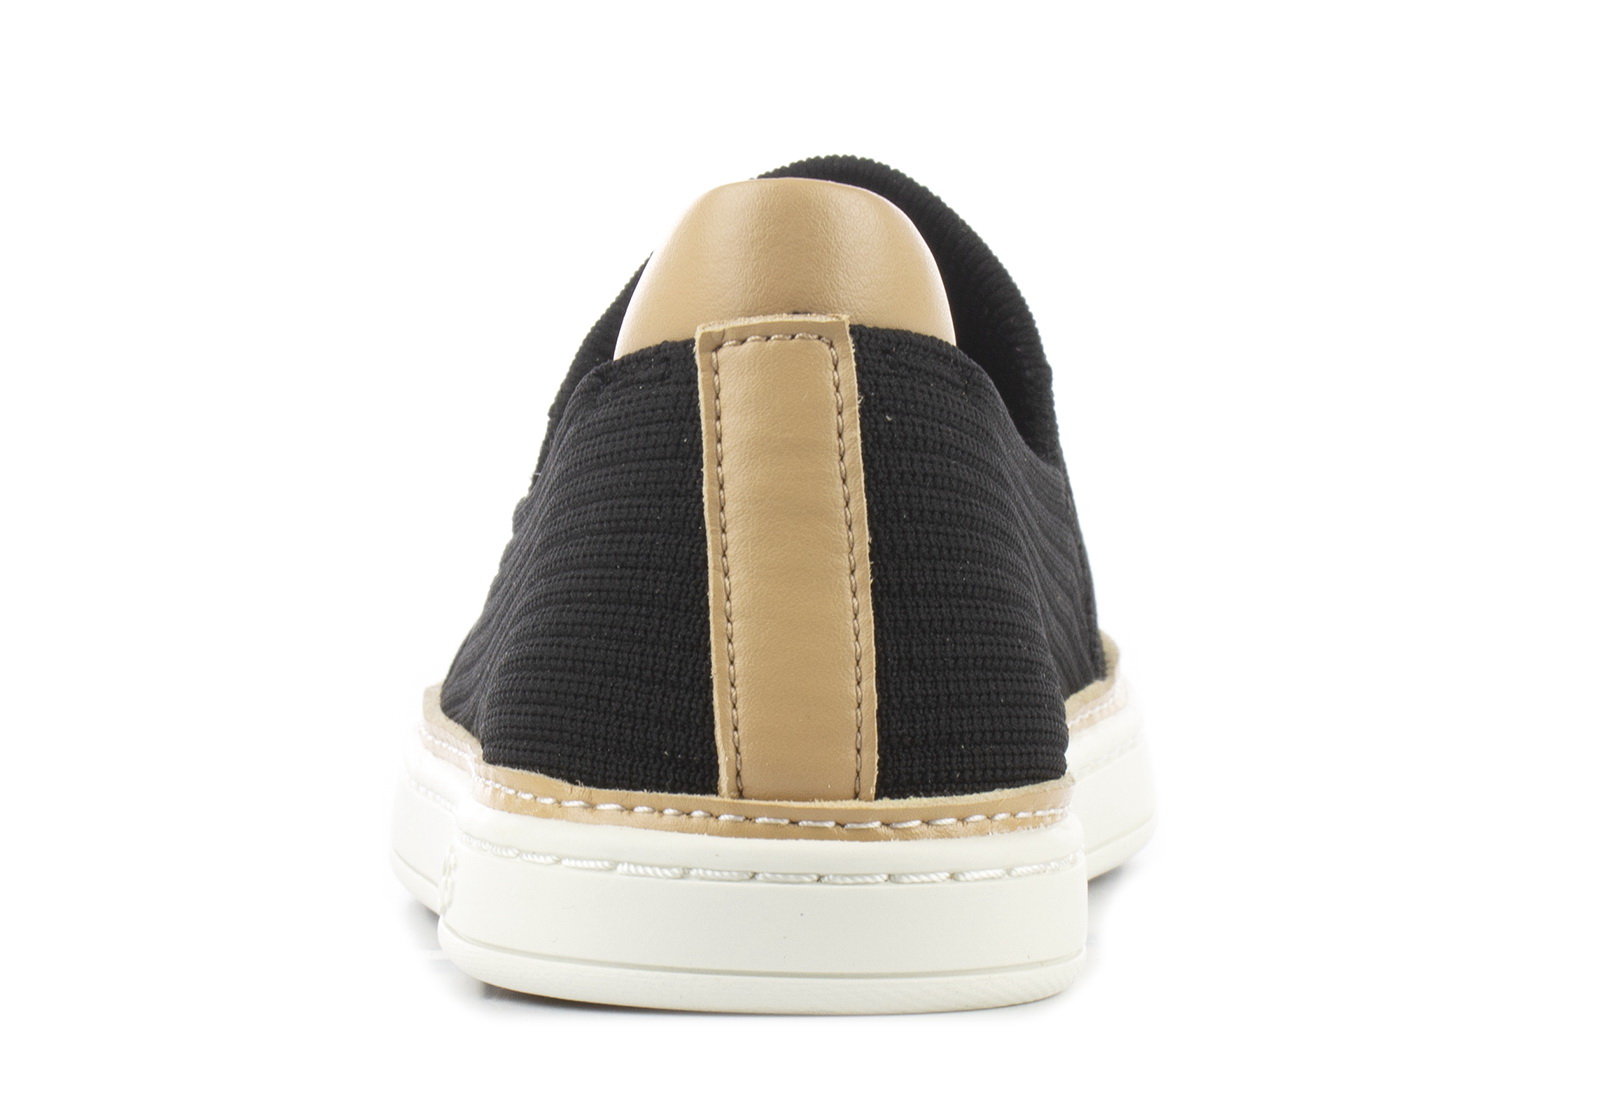 UGG Slip-ons - W Sammy - 1112259-BLK - Online shop for sneakers, shoes ...